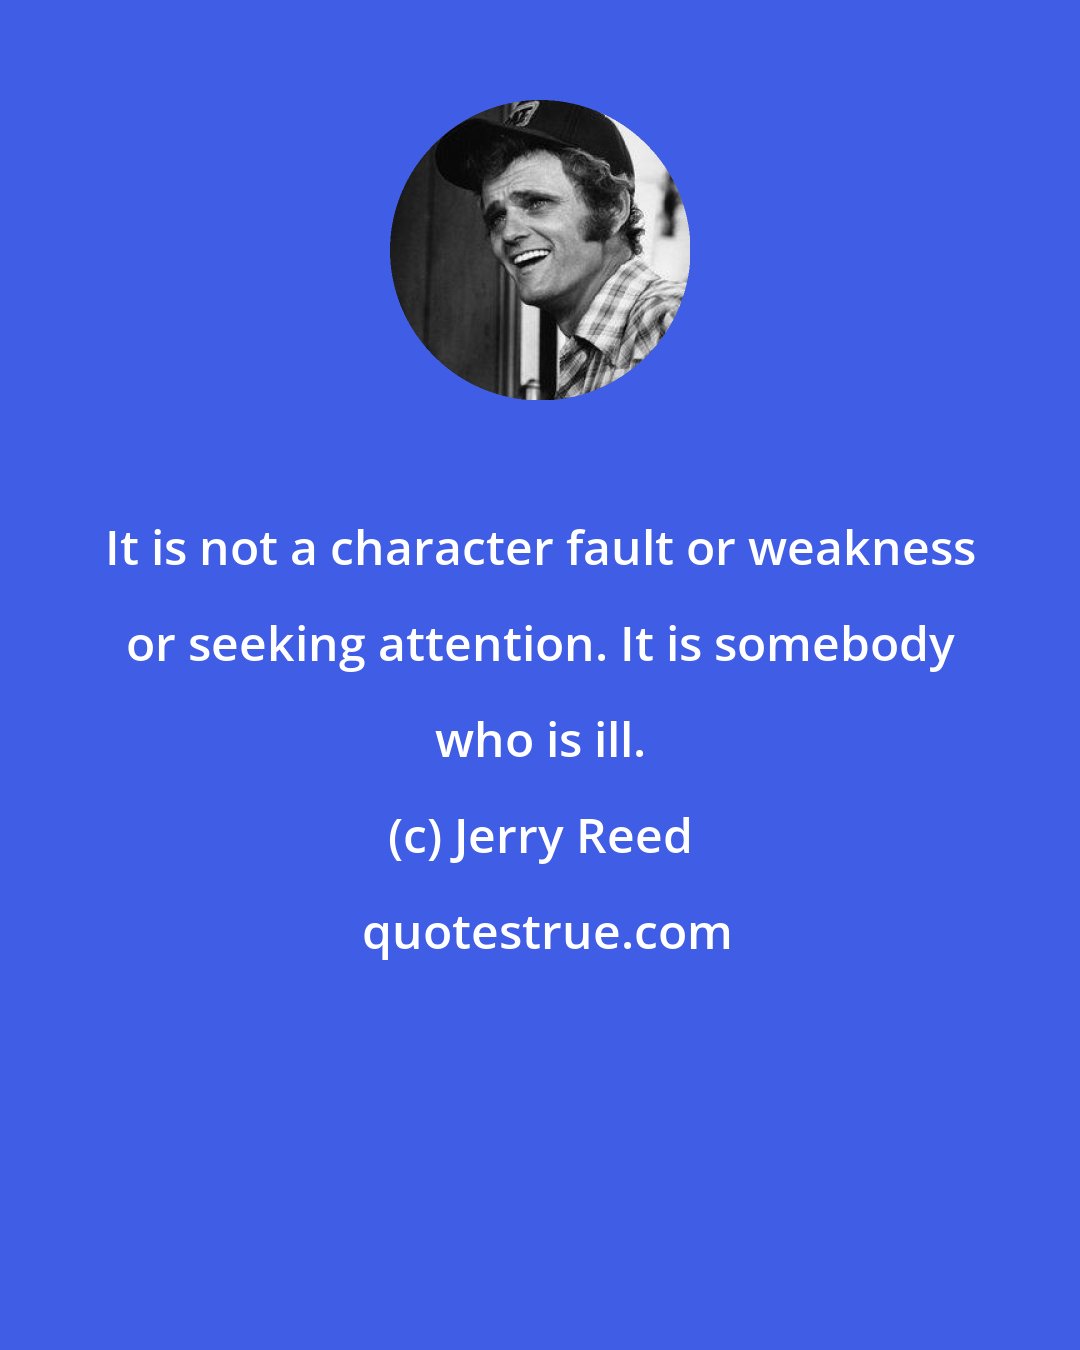 Jerry Reed: It is not a character fault or weakness or seeking attention. It is somebody who is ill.